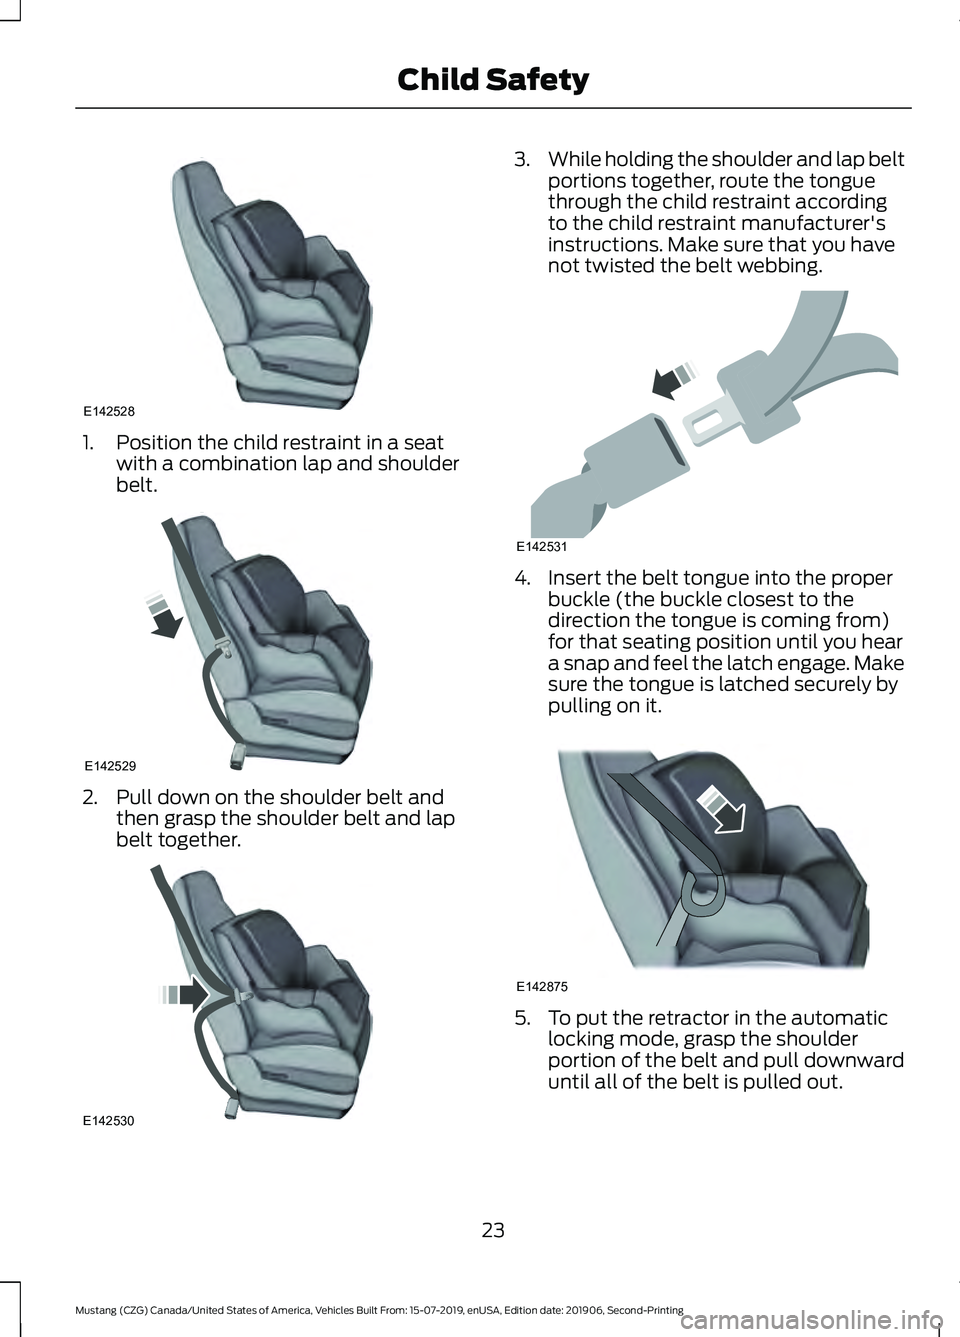 FORD MUSTANG 2020 Owners Manual 1. Position the child restraint in a seat
with a combination lap and shoulder
belt. 2. Pull down on the shoulder belt and
then grasp the shoulder belt and lap
belt together. 3.
While holding the shoul